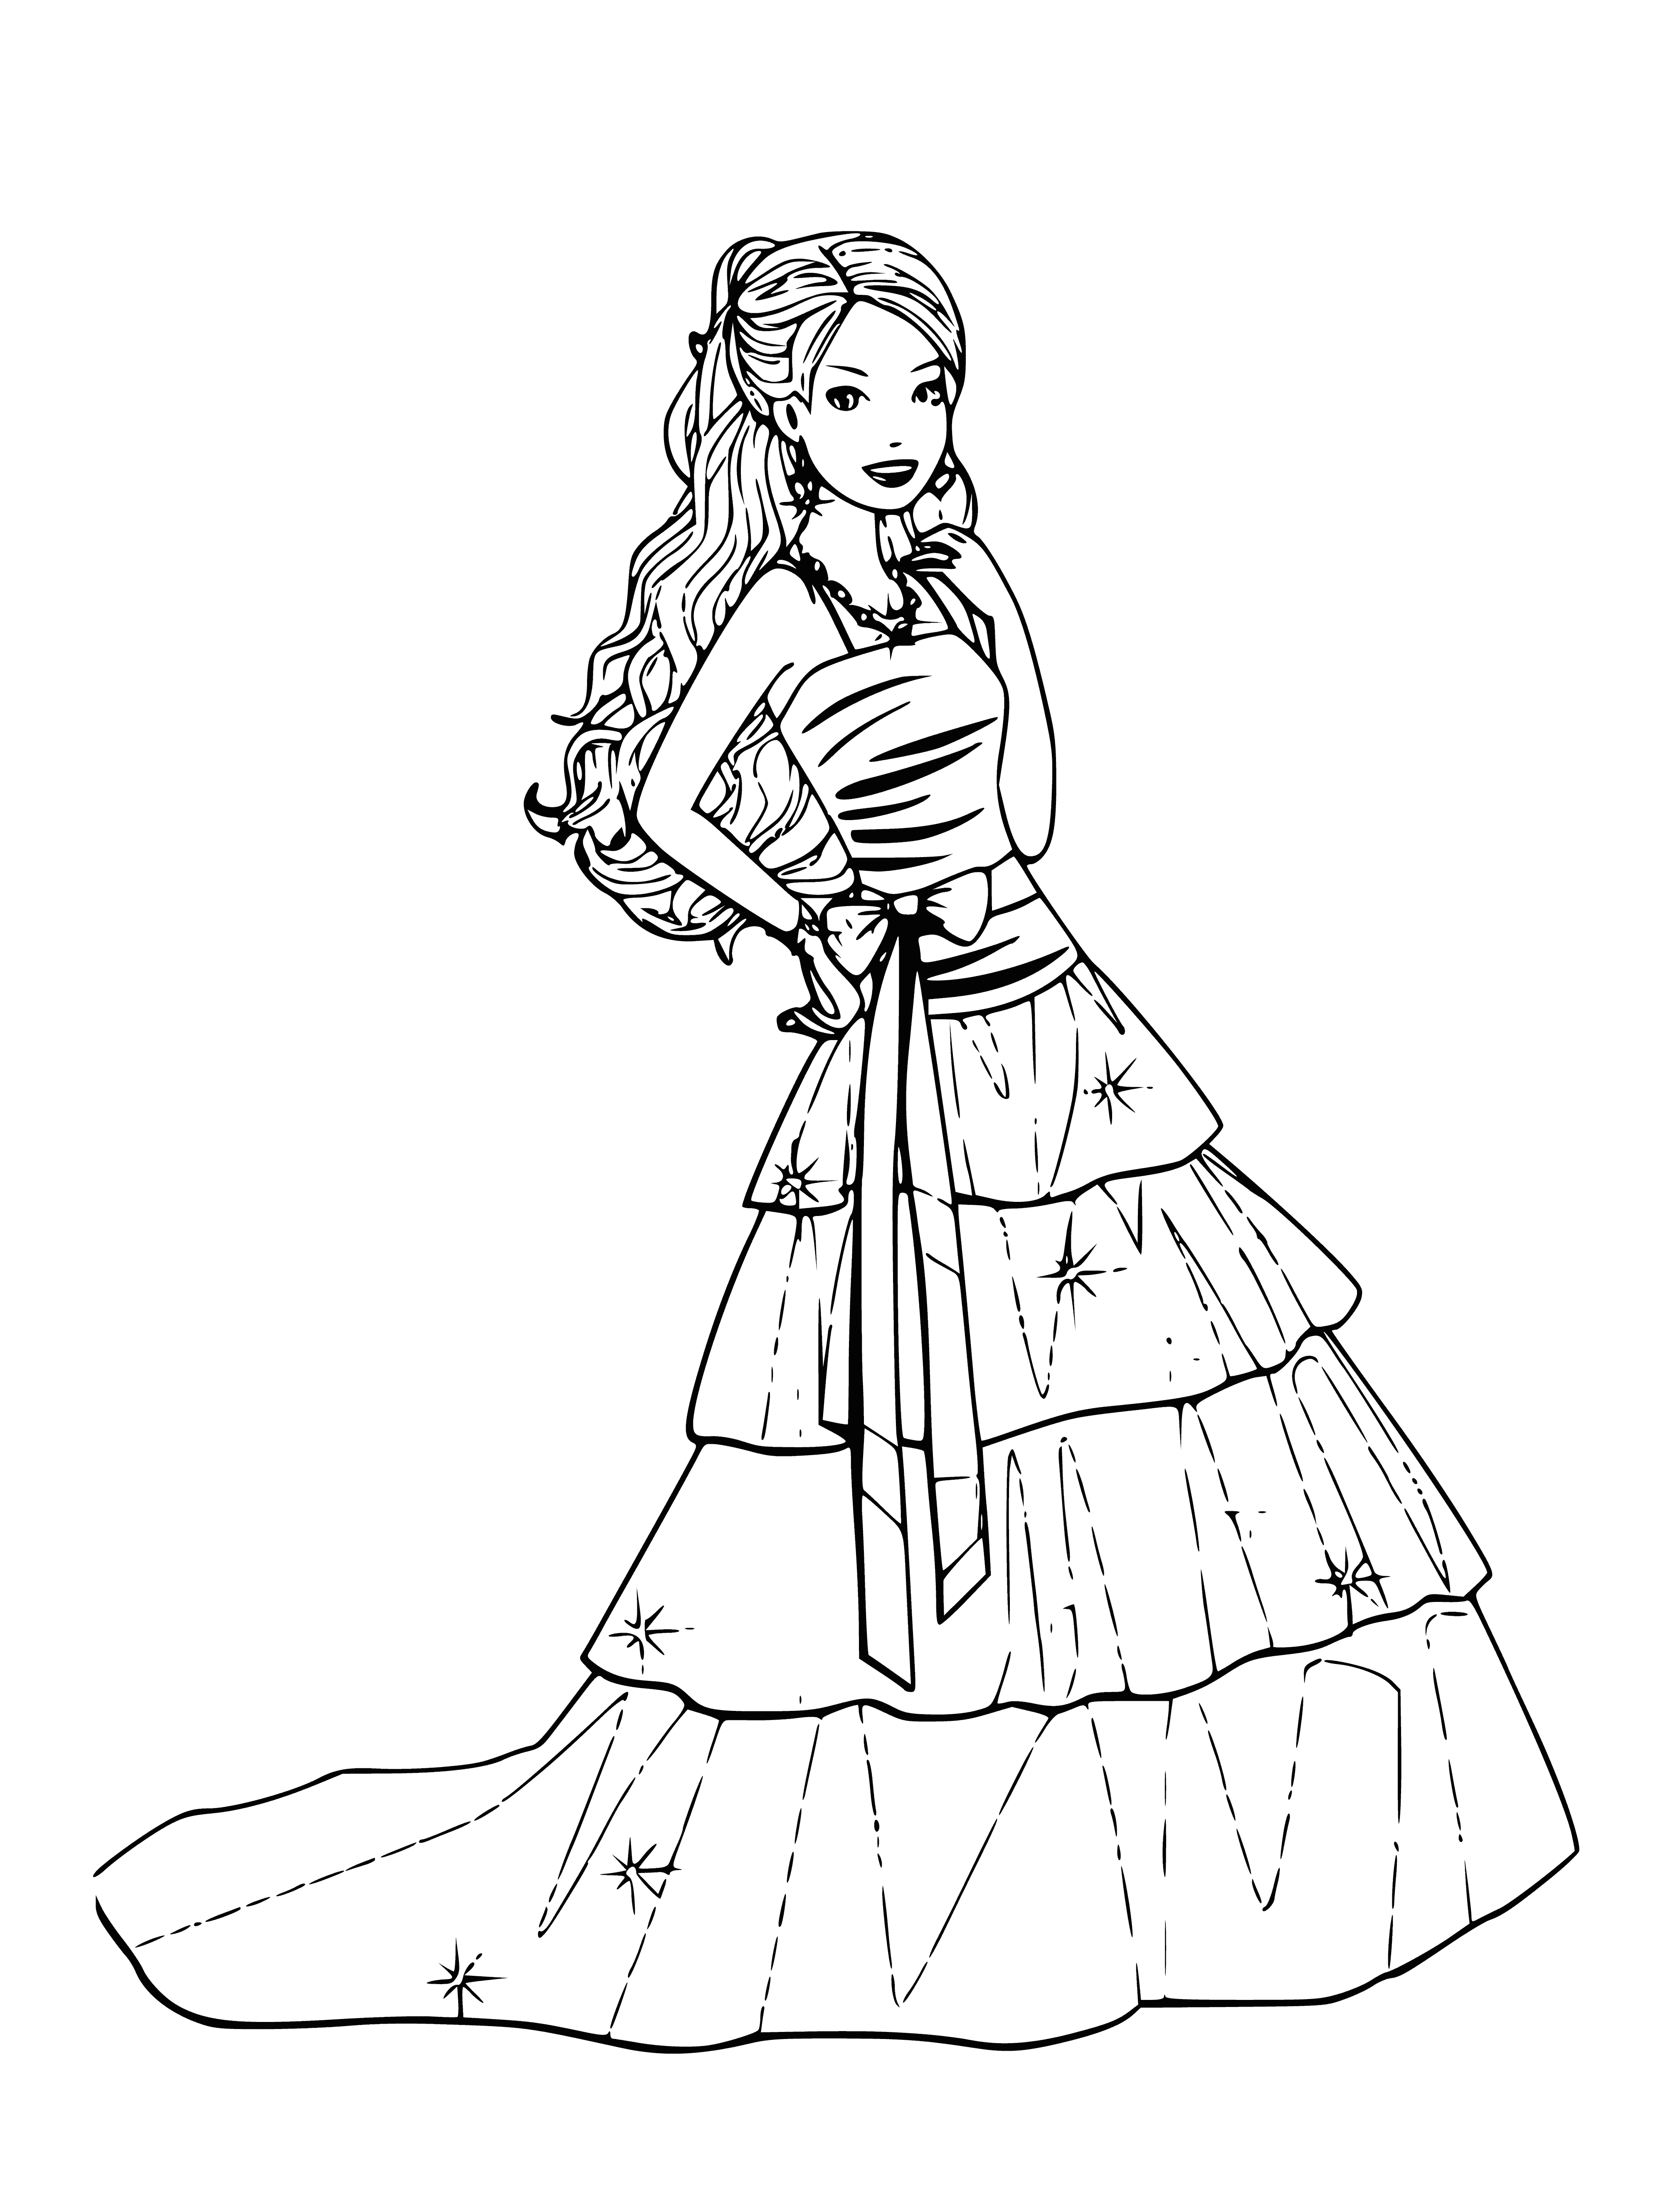 Barbie in an elegant dress coloring page